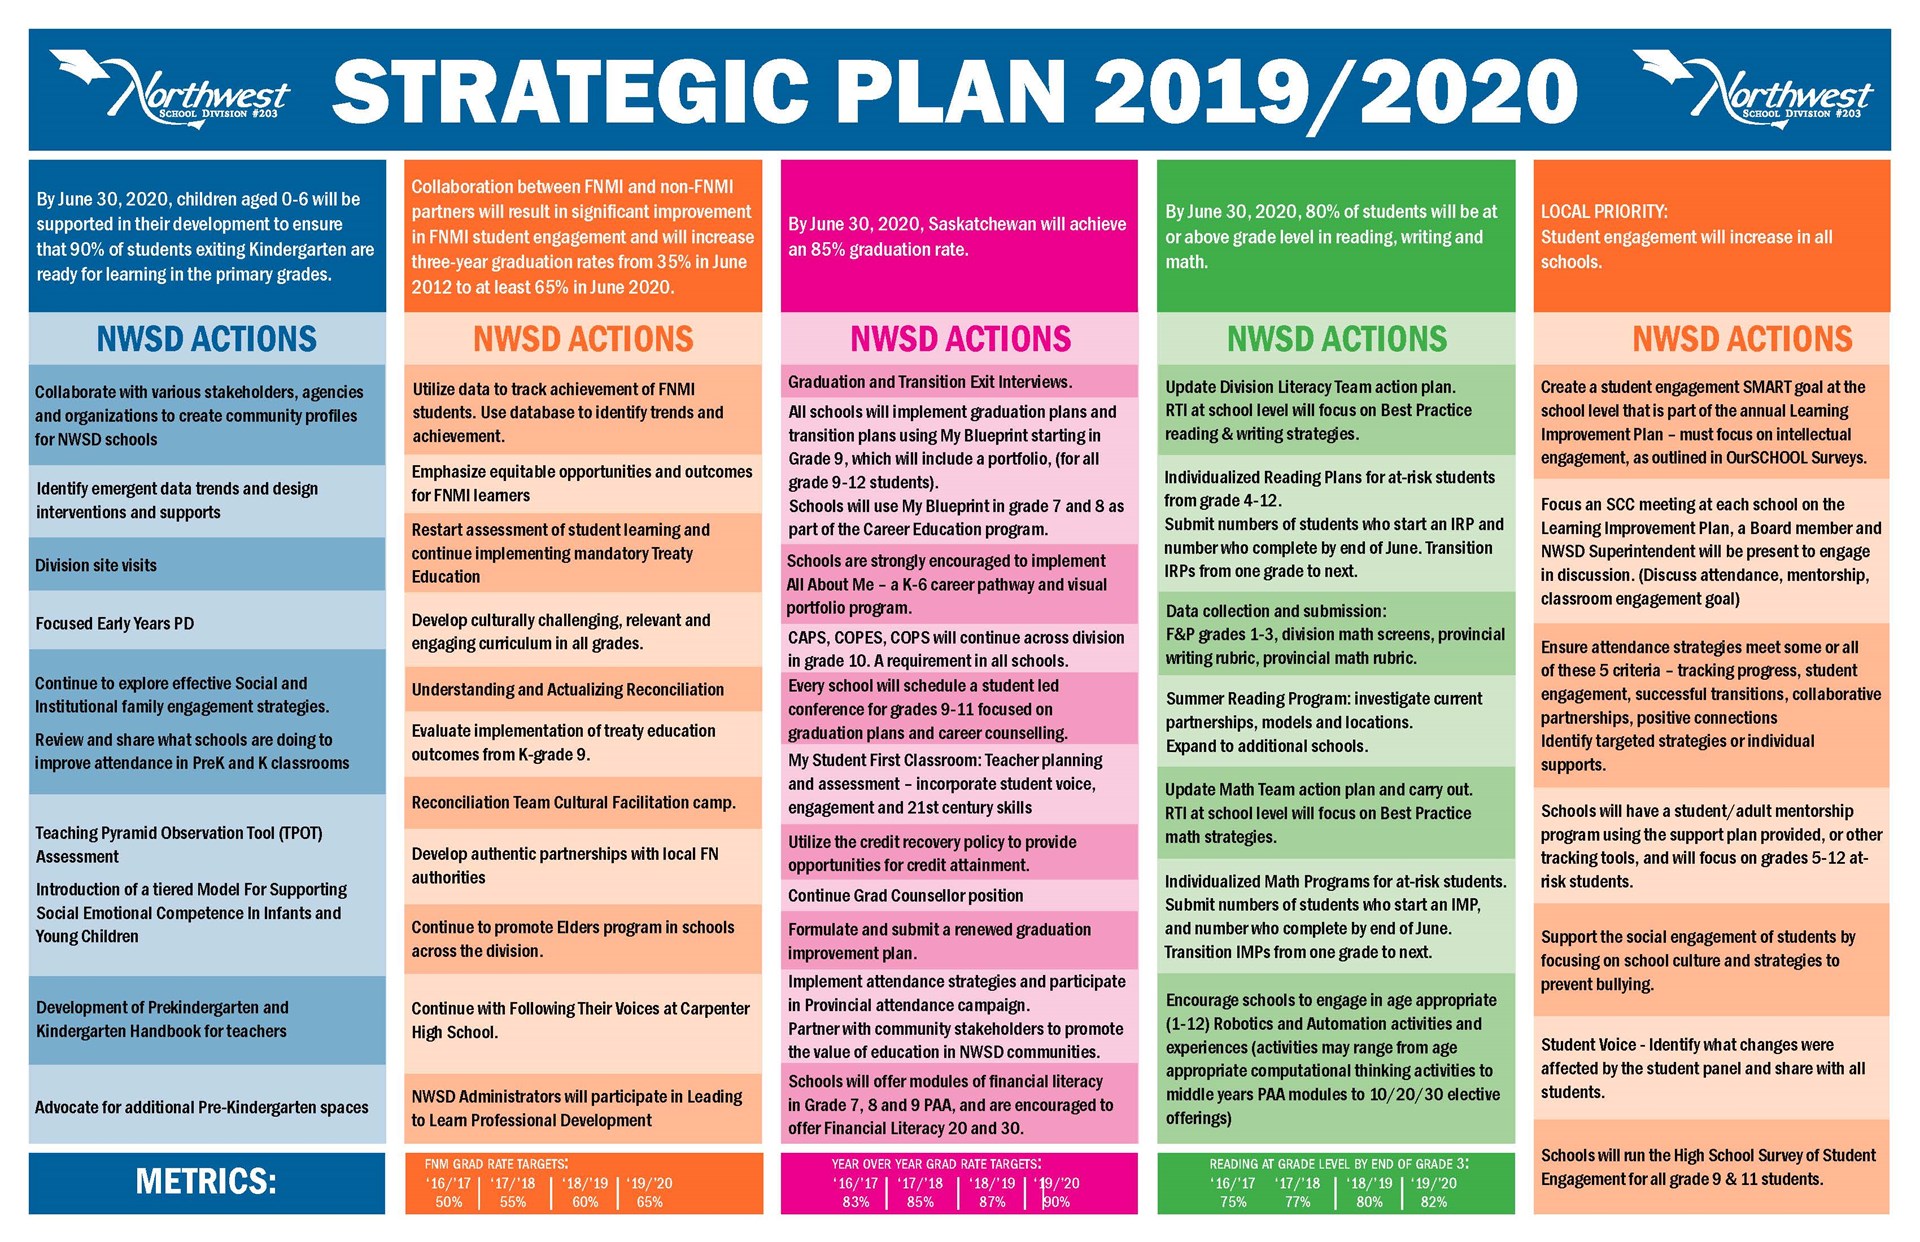 strategic planning in education sector